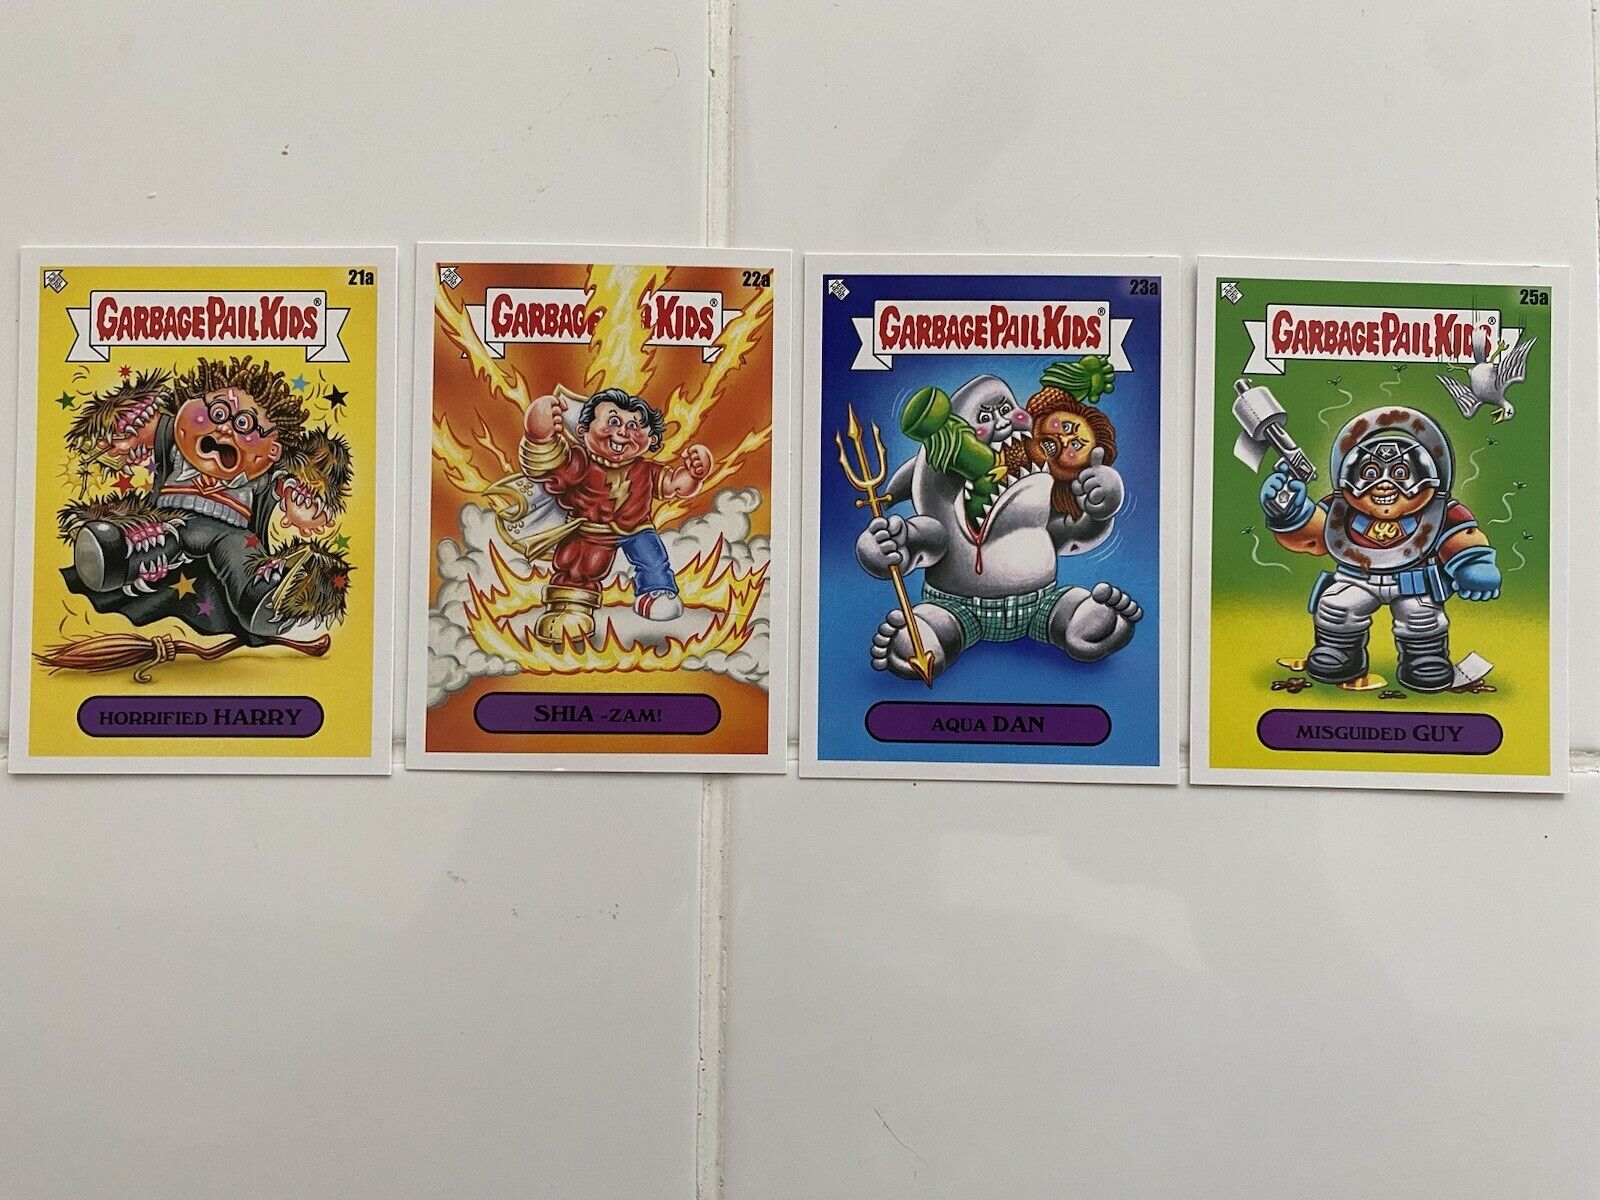 Garbage Pail Kids Book Worms. Gross Adaptations Walmart exclusive 21, 22, 23, 25